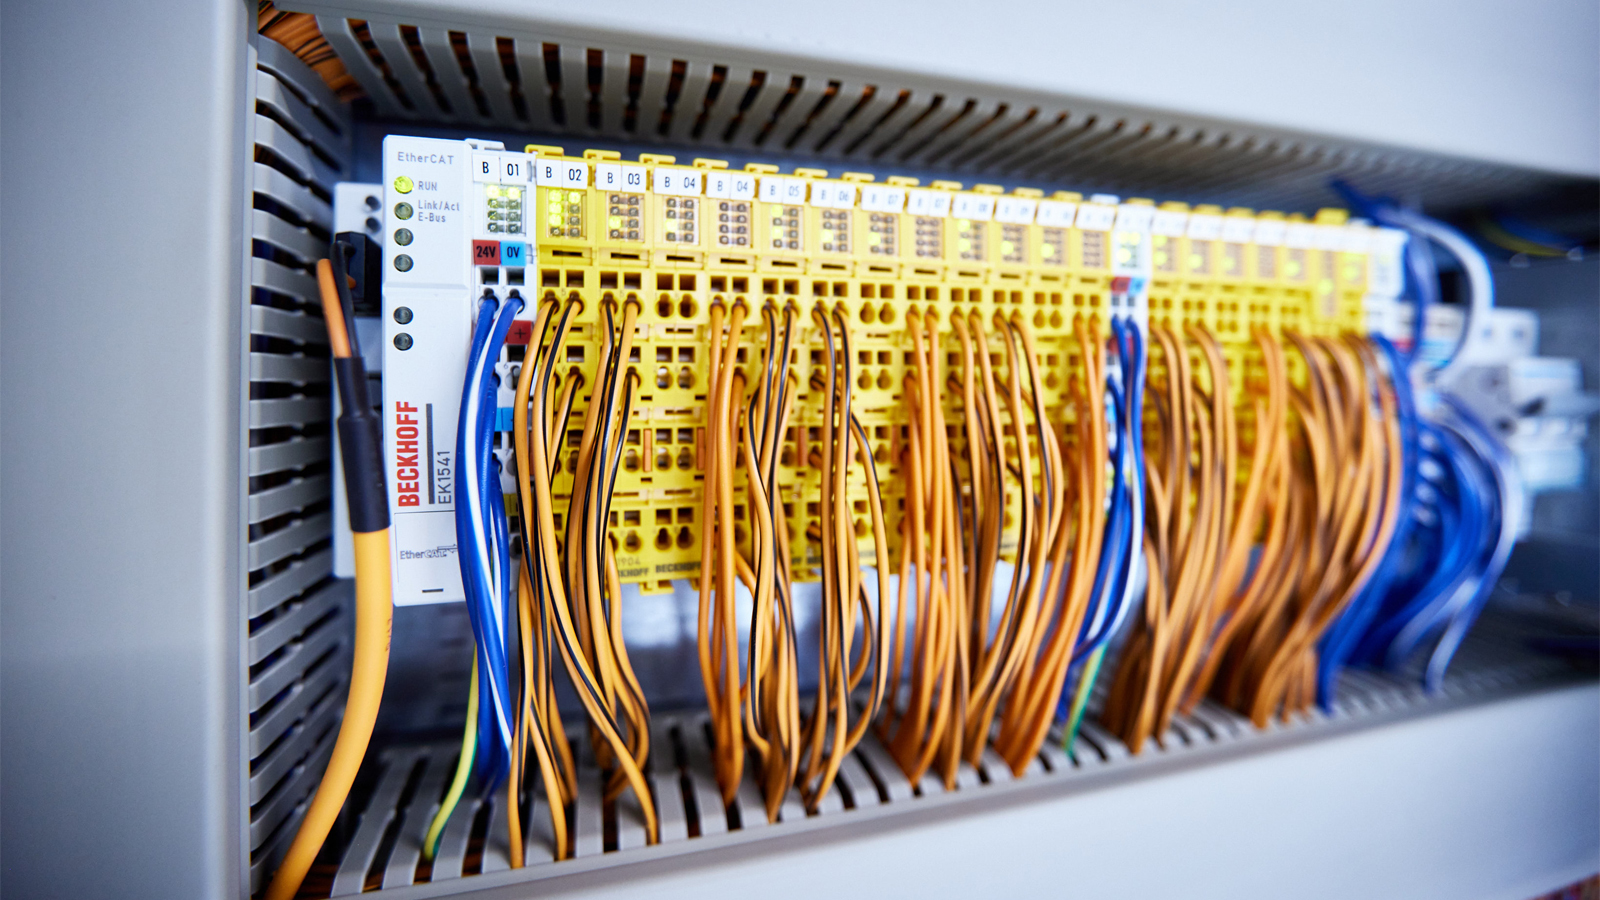 When working with such high voltages and currents, safety is paramount: the system is monitored via TwinSAFE Terminals for over 620 safety-relevant channels. 